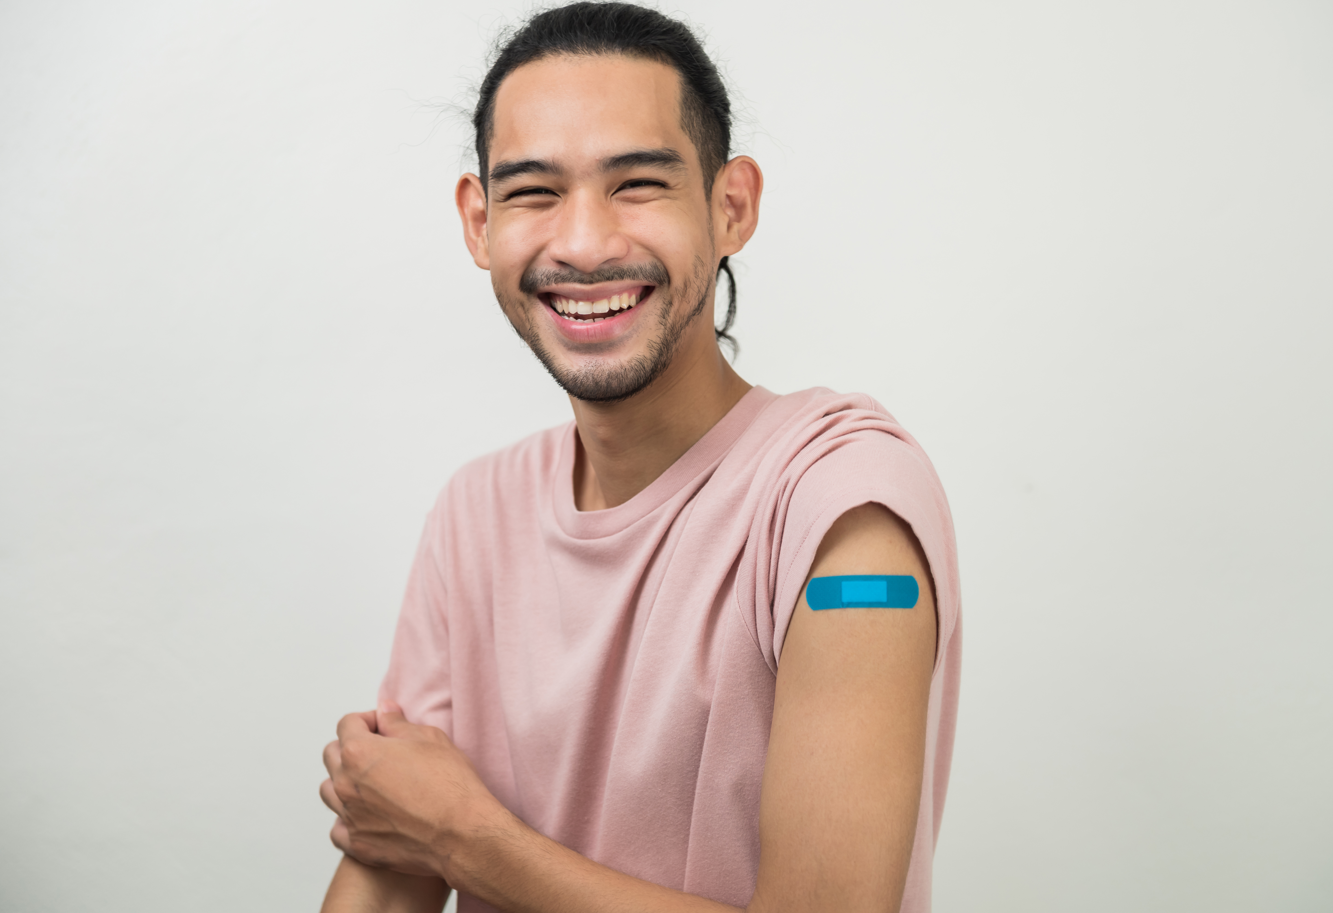 A young man smiling with a bandage on his arm